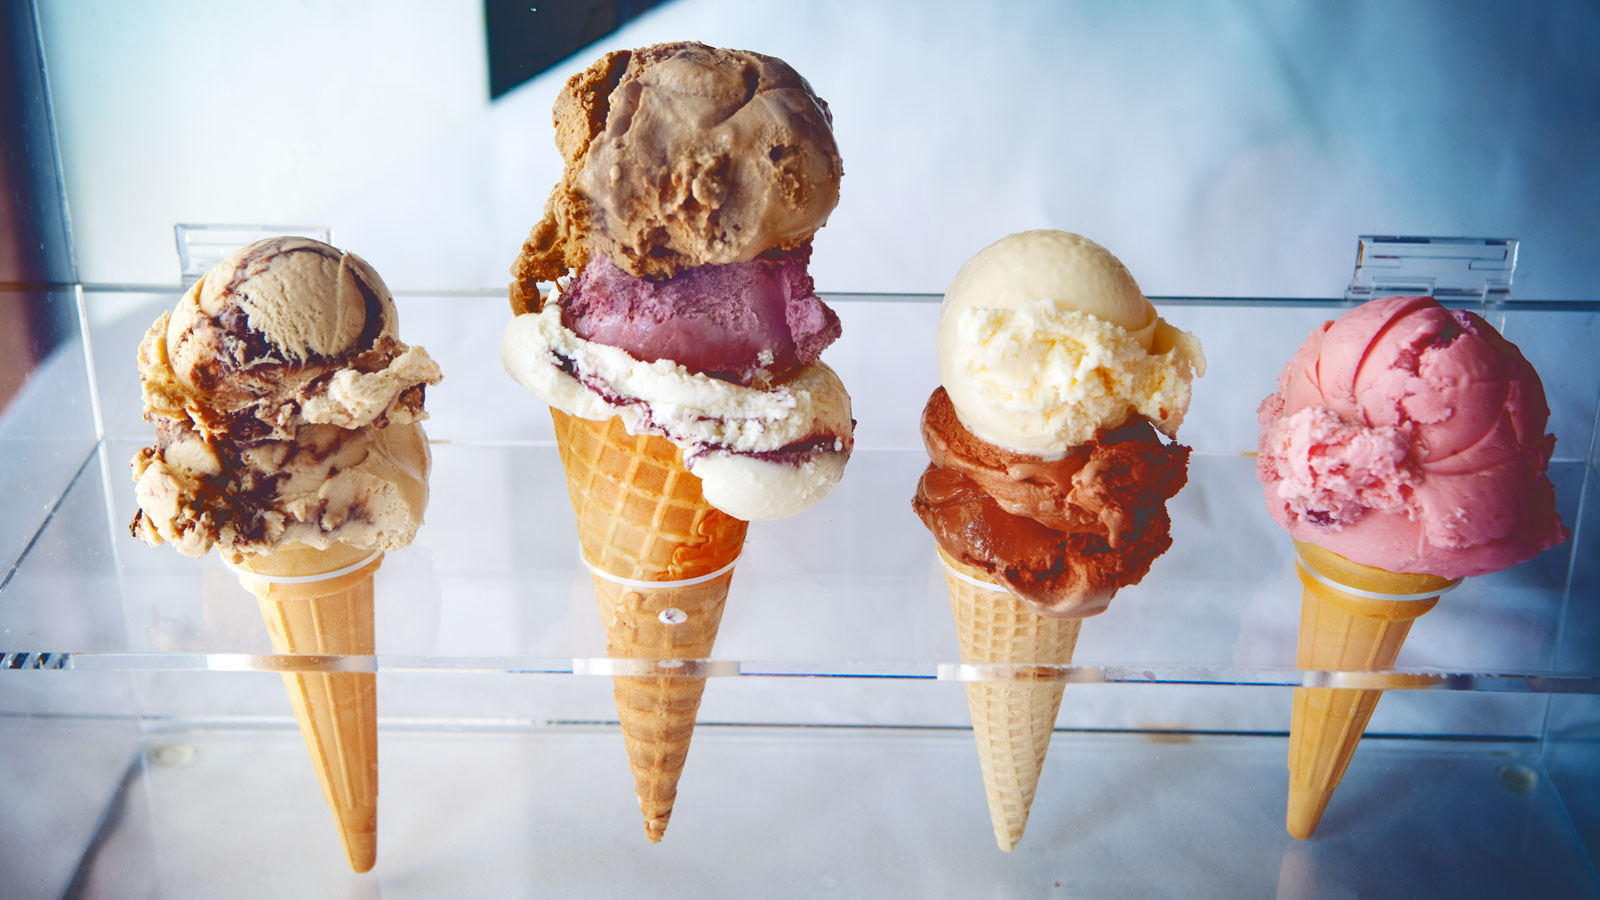 Four ice cream cones from the Dairy Bar